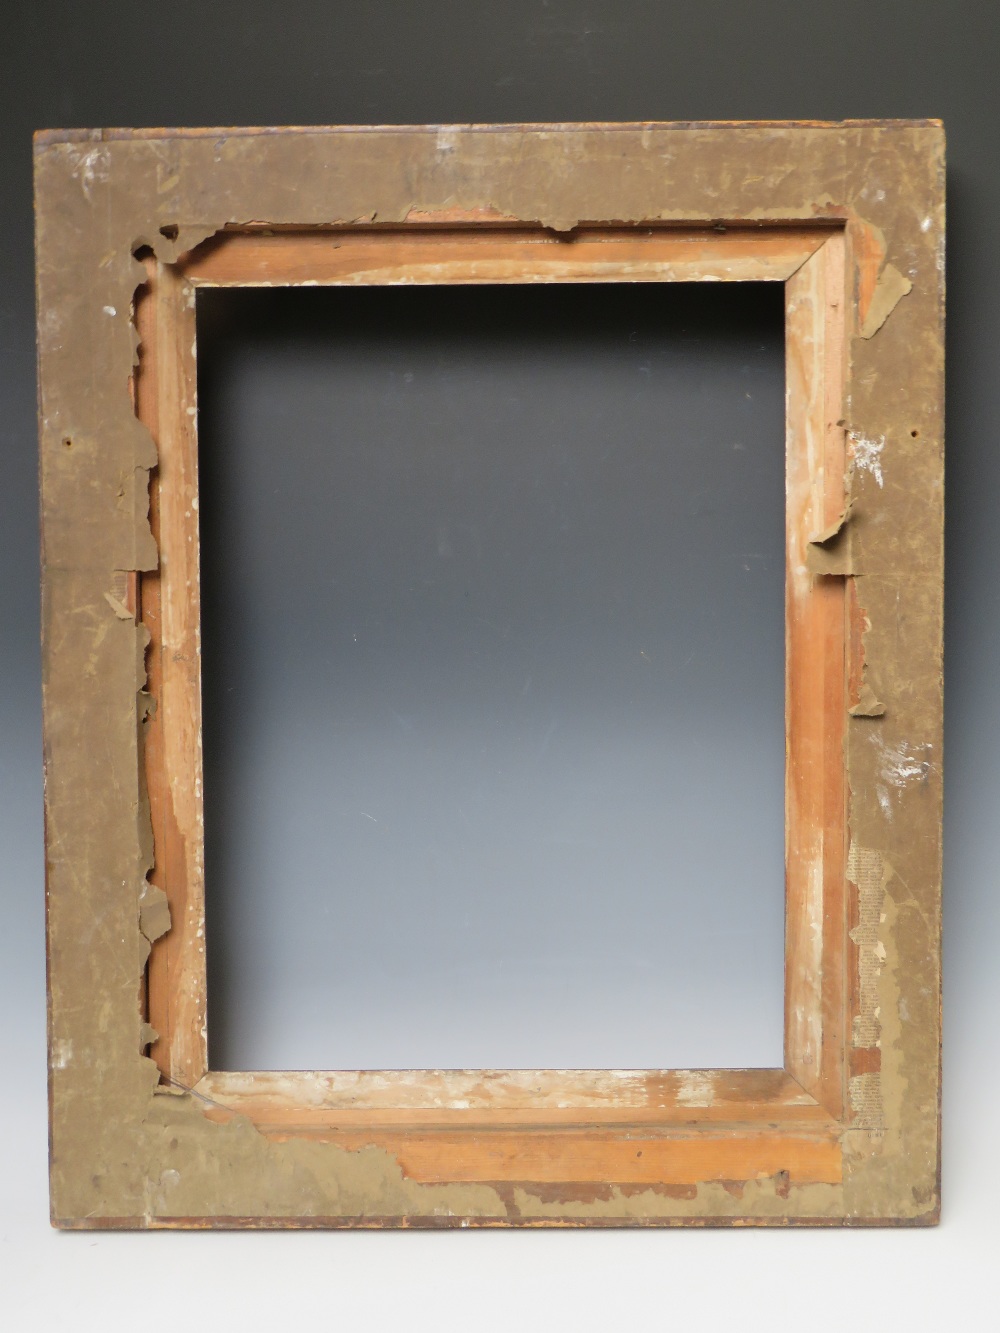 A LATE 18TH / EARLY 19TH CENTURY MAPLE FRAME, with gold slip, frame W 8 cm, rebate 57 x 44.5 cm - Image 4 of 4